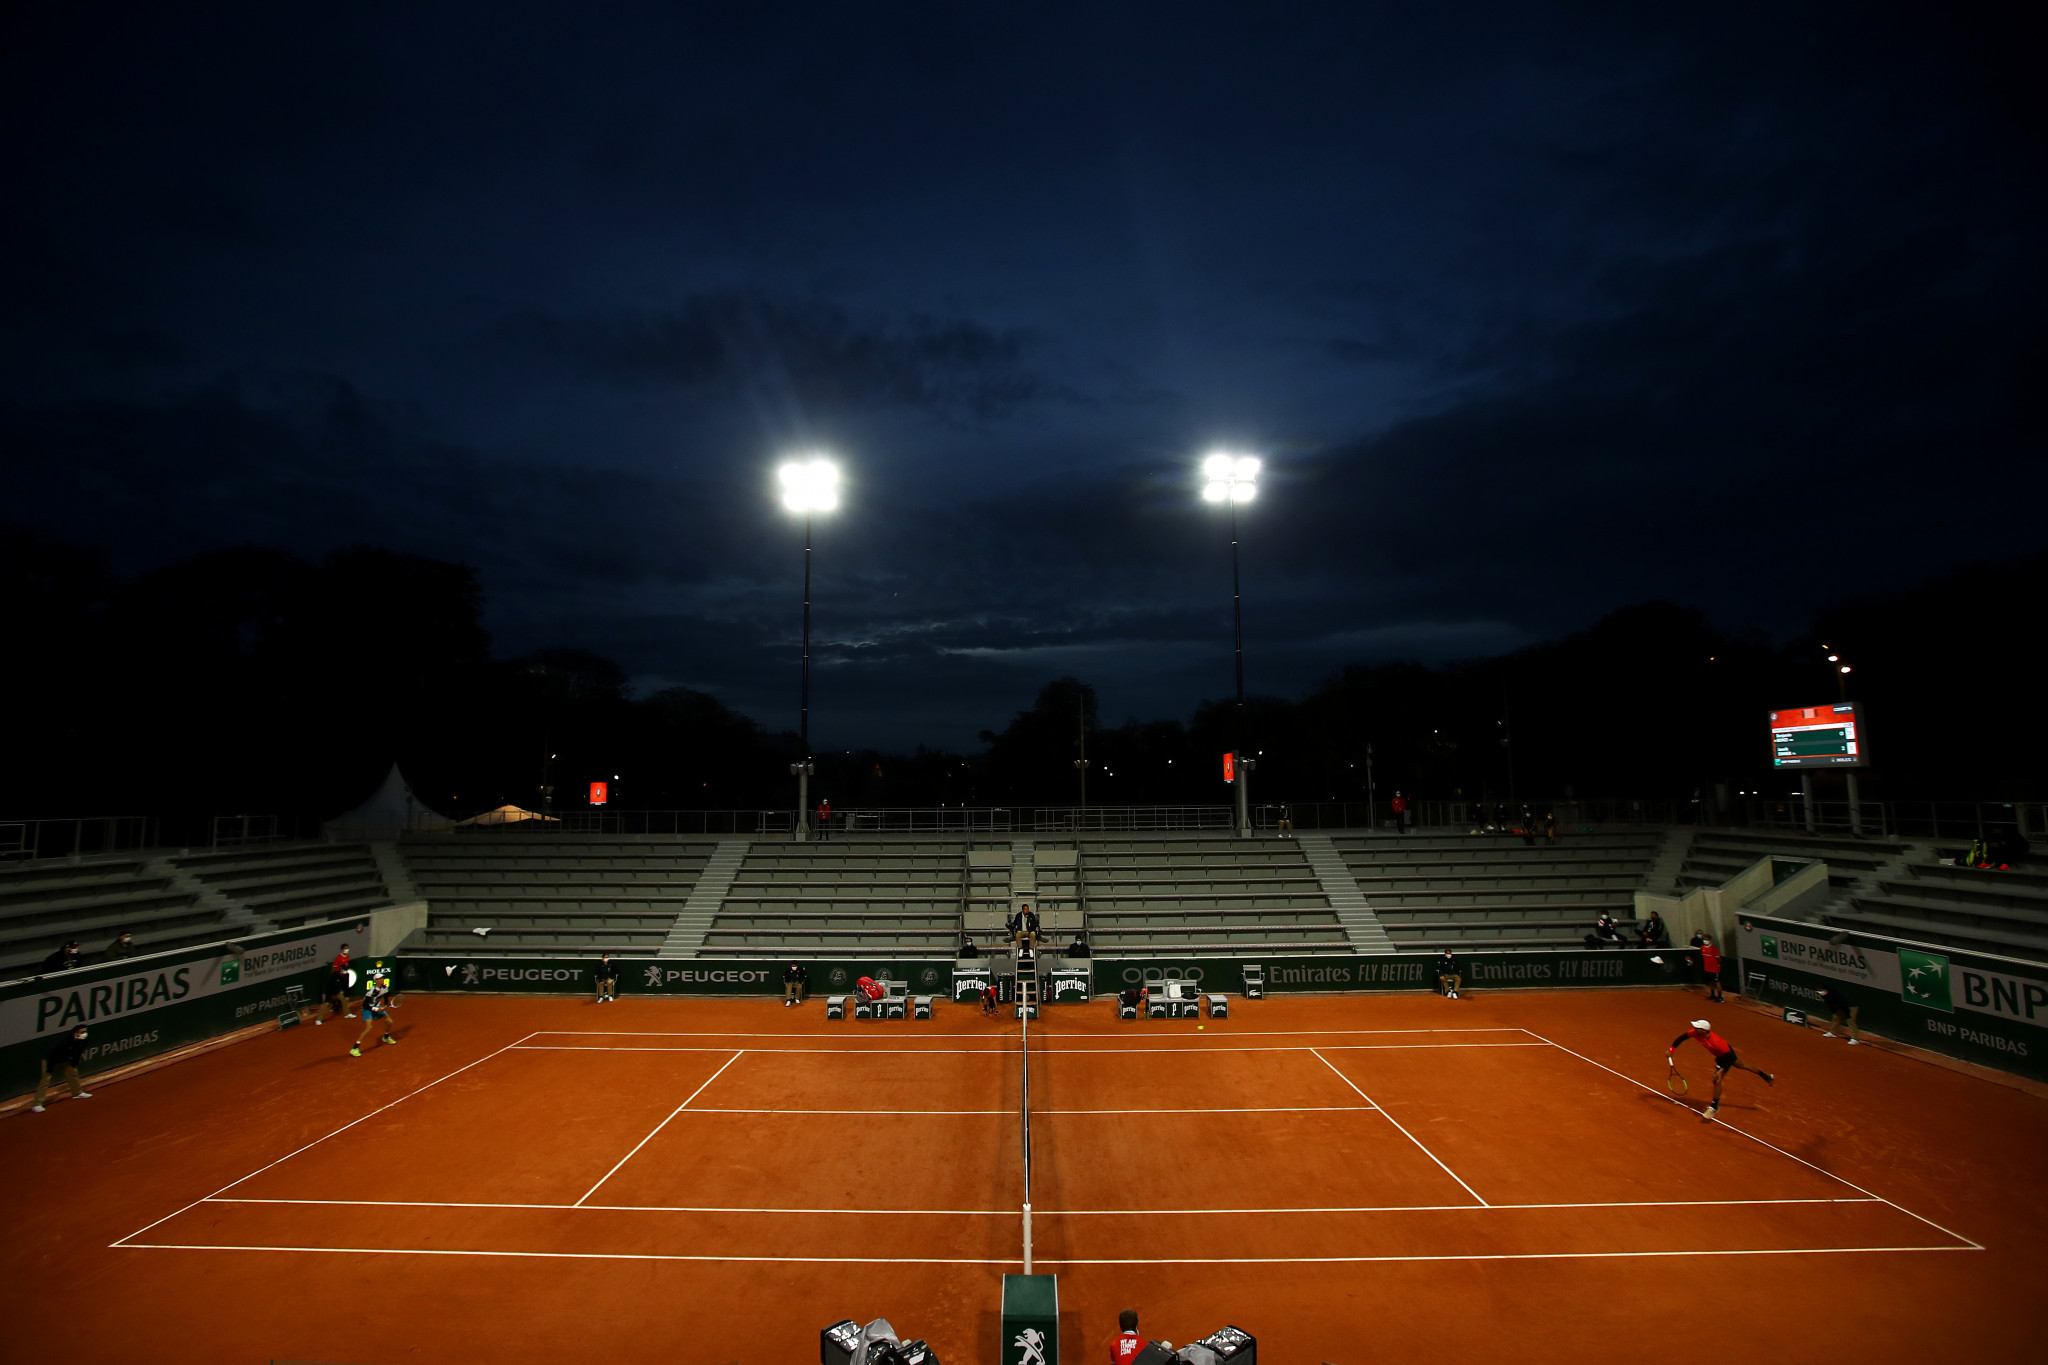 The addition of floodlights to the Roland Garros complex has enabled action to continue on all courts after dark ©Getty Images